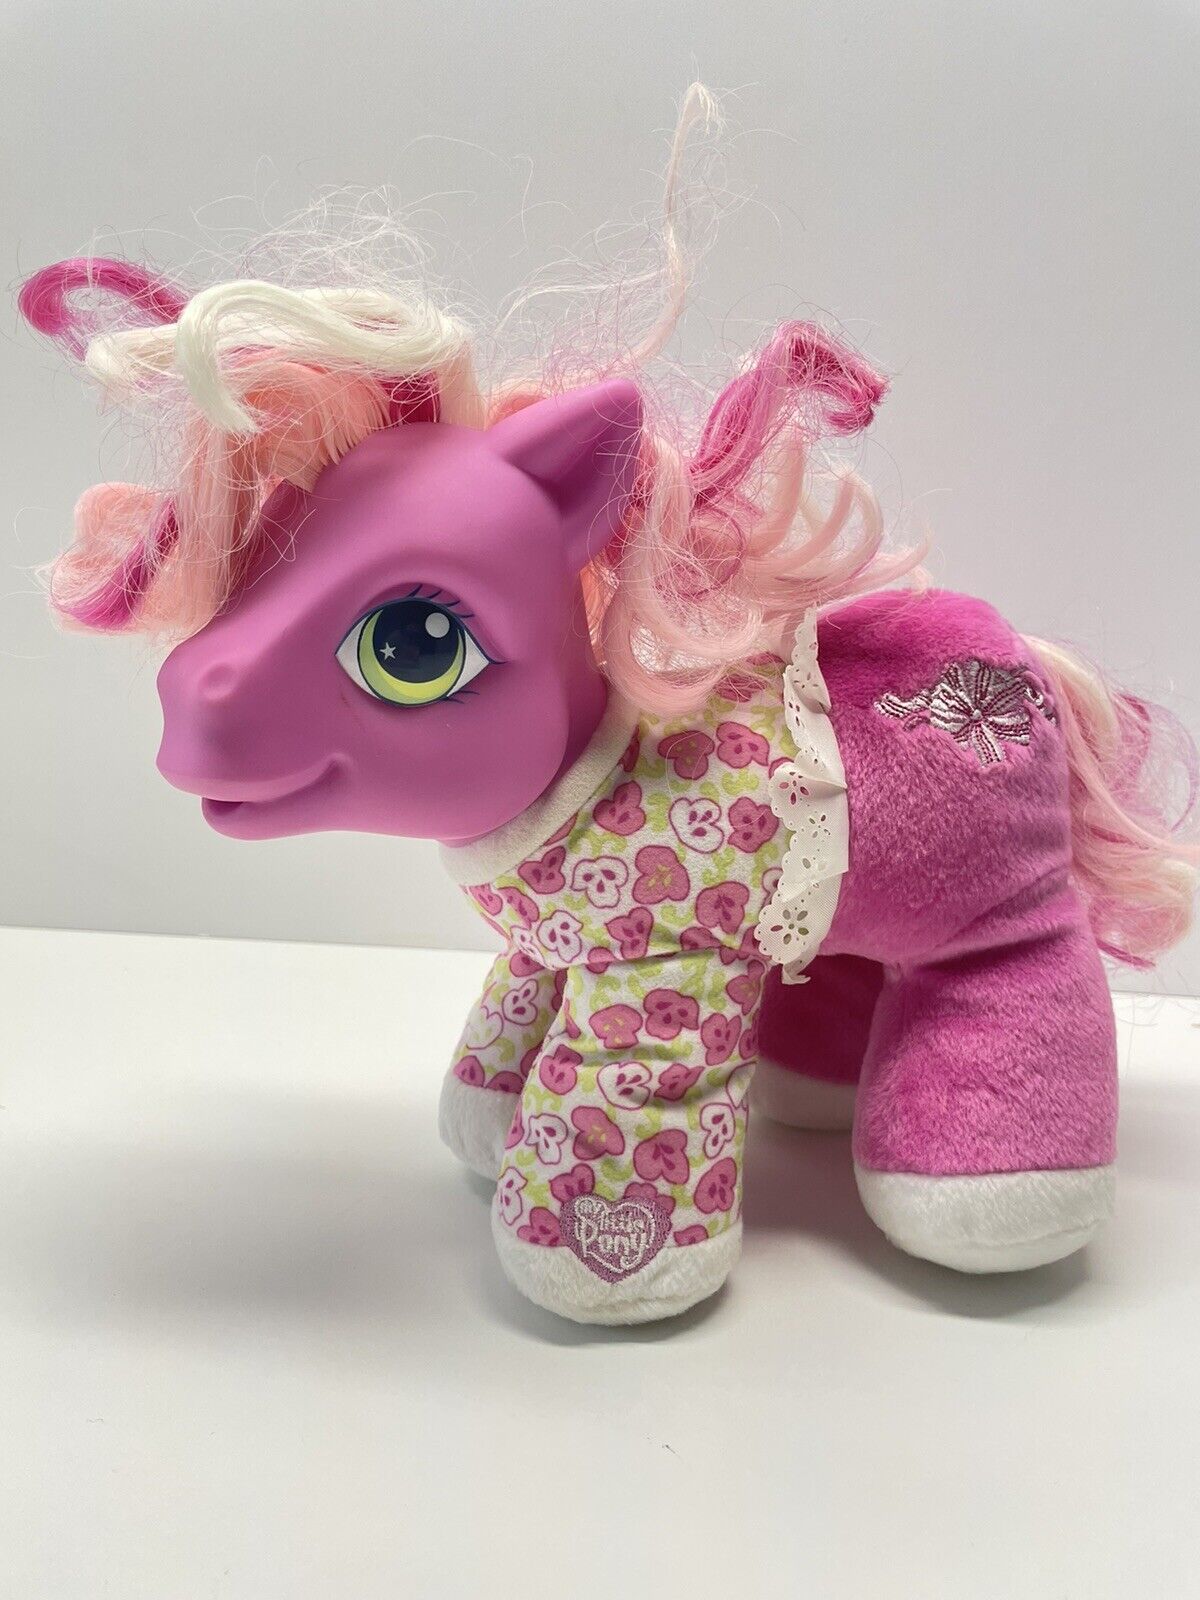 My Little Pony Pretty Powder Hasbro 2003 Hear Her Giggle Drinking Sounds Works